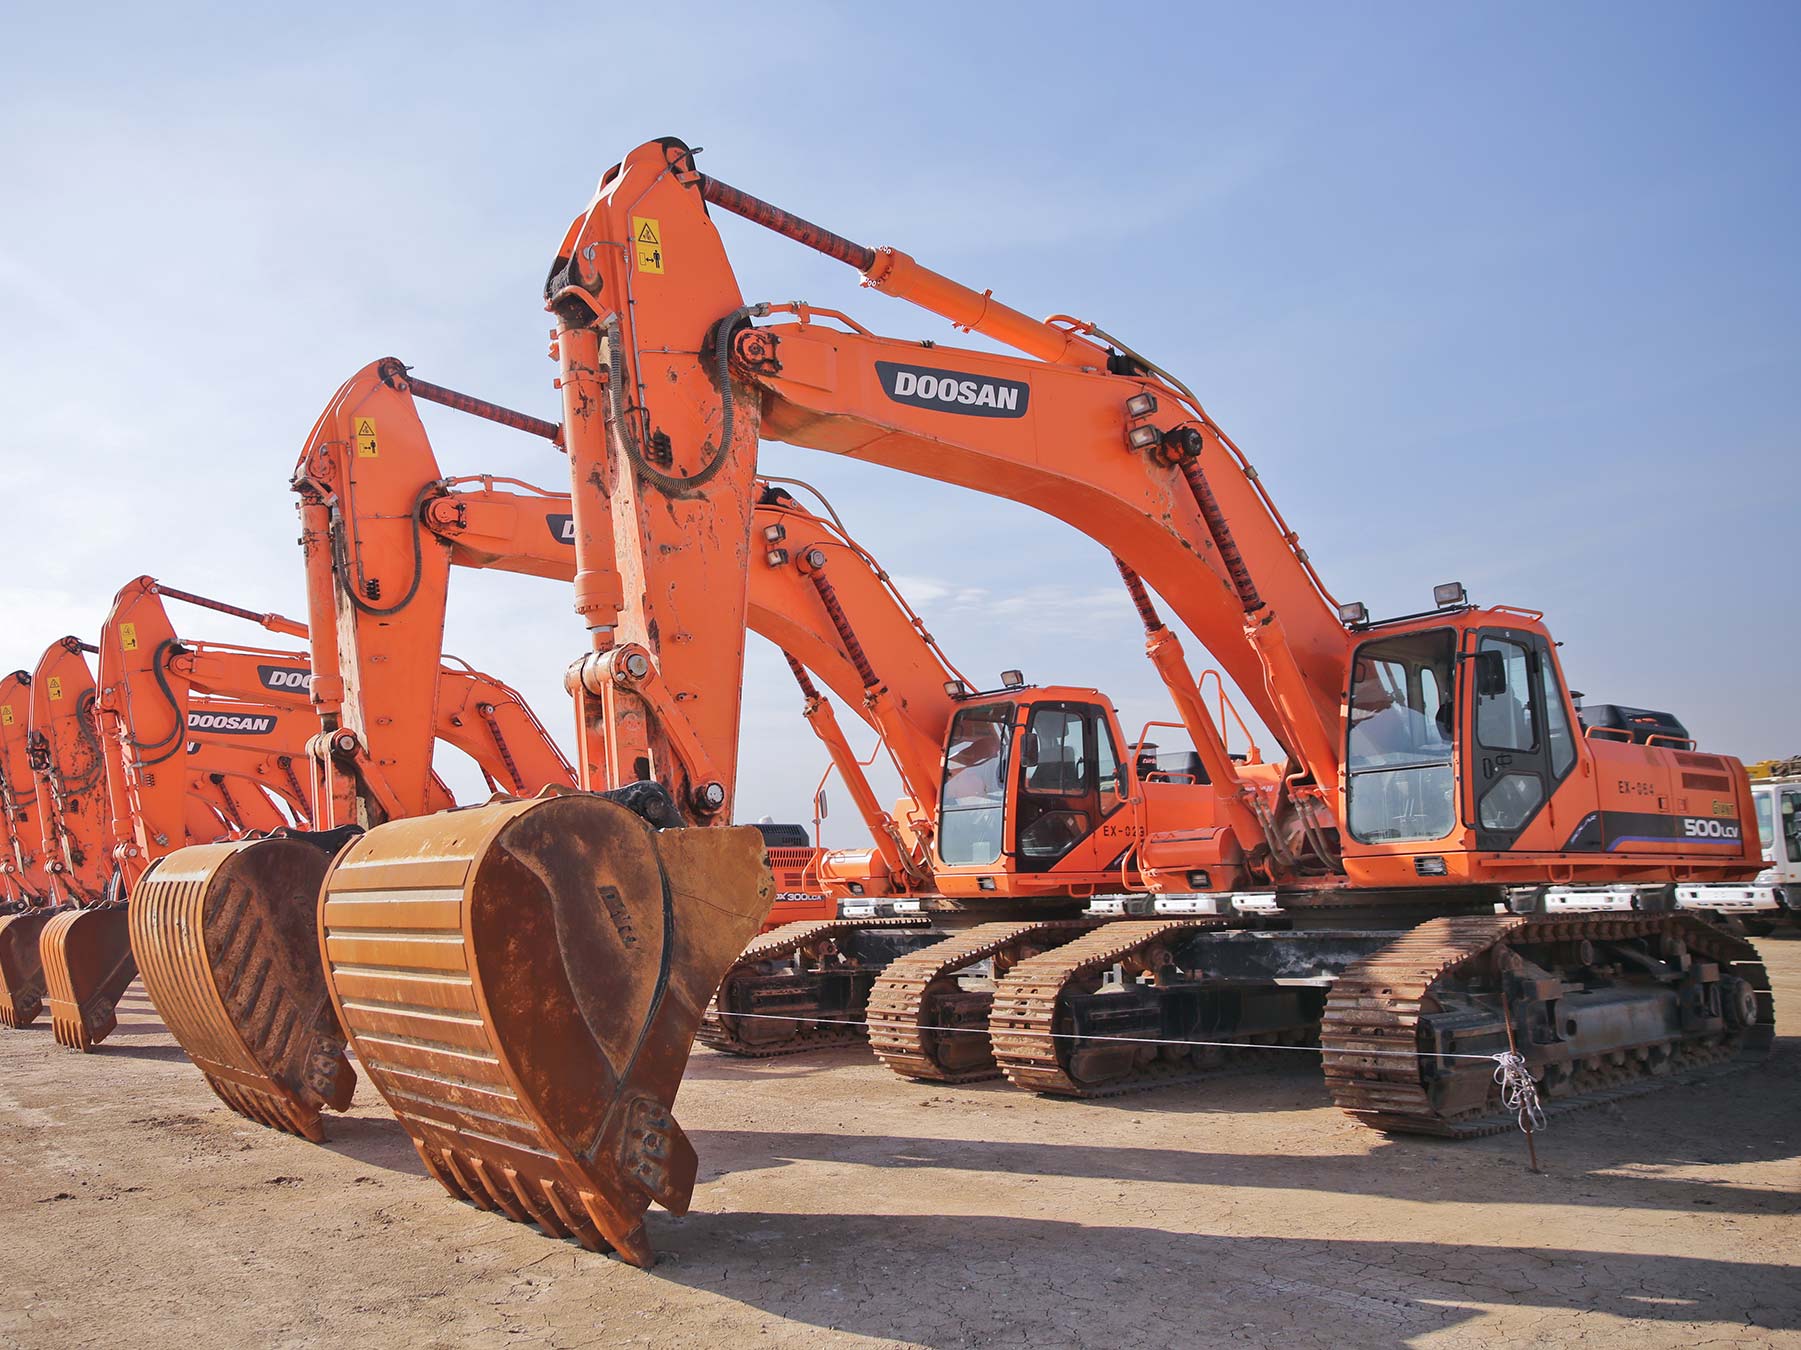 10 of the Largest Excavators in the World!